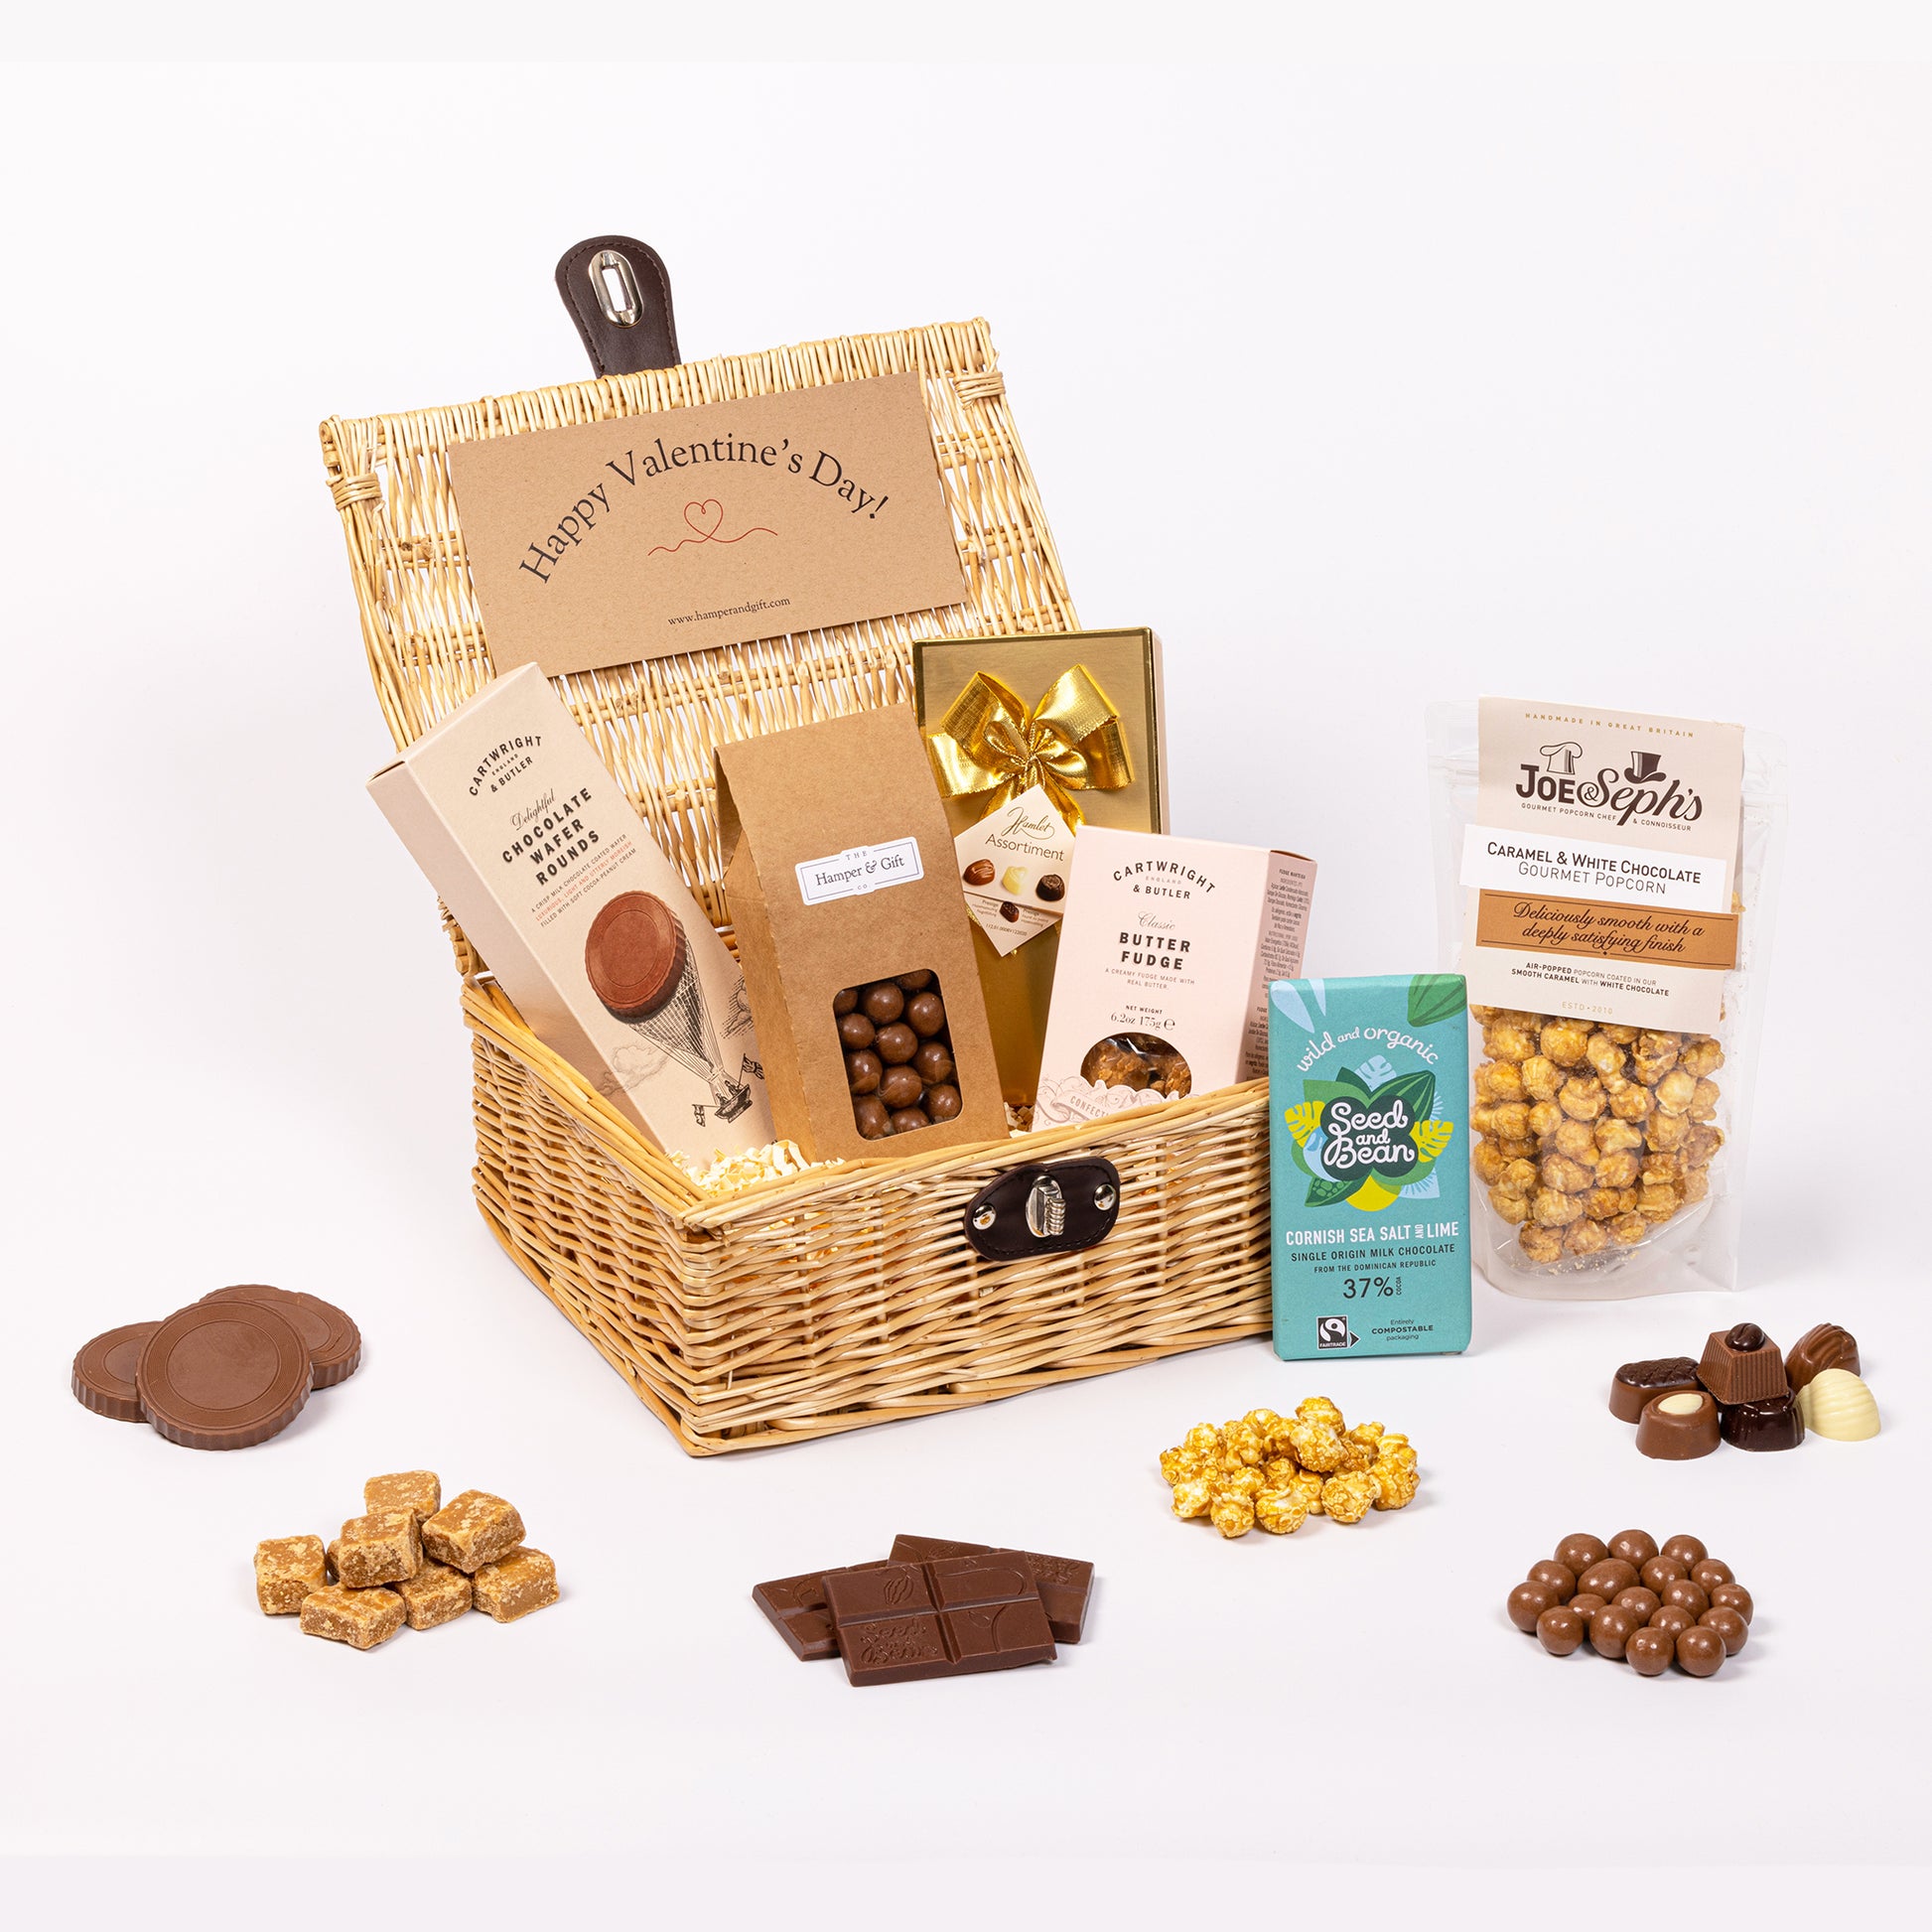 Valentines Day Chocolate & Fudge Hamper filled with a variety of chocolate, fudge, biscuit and gourmet popcorn